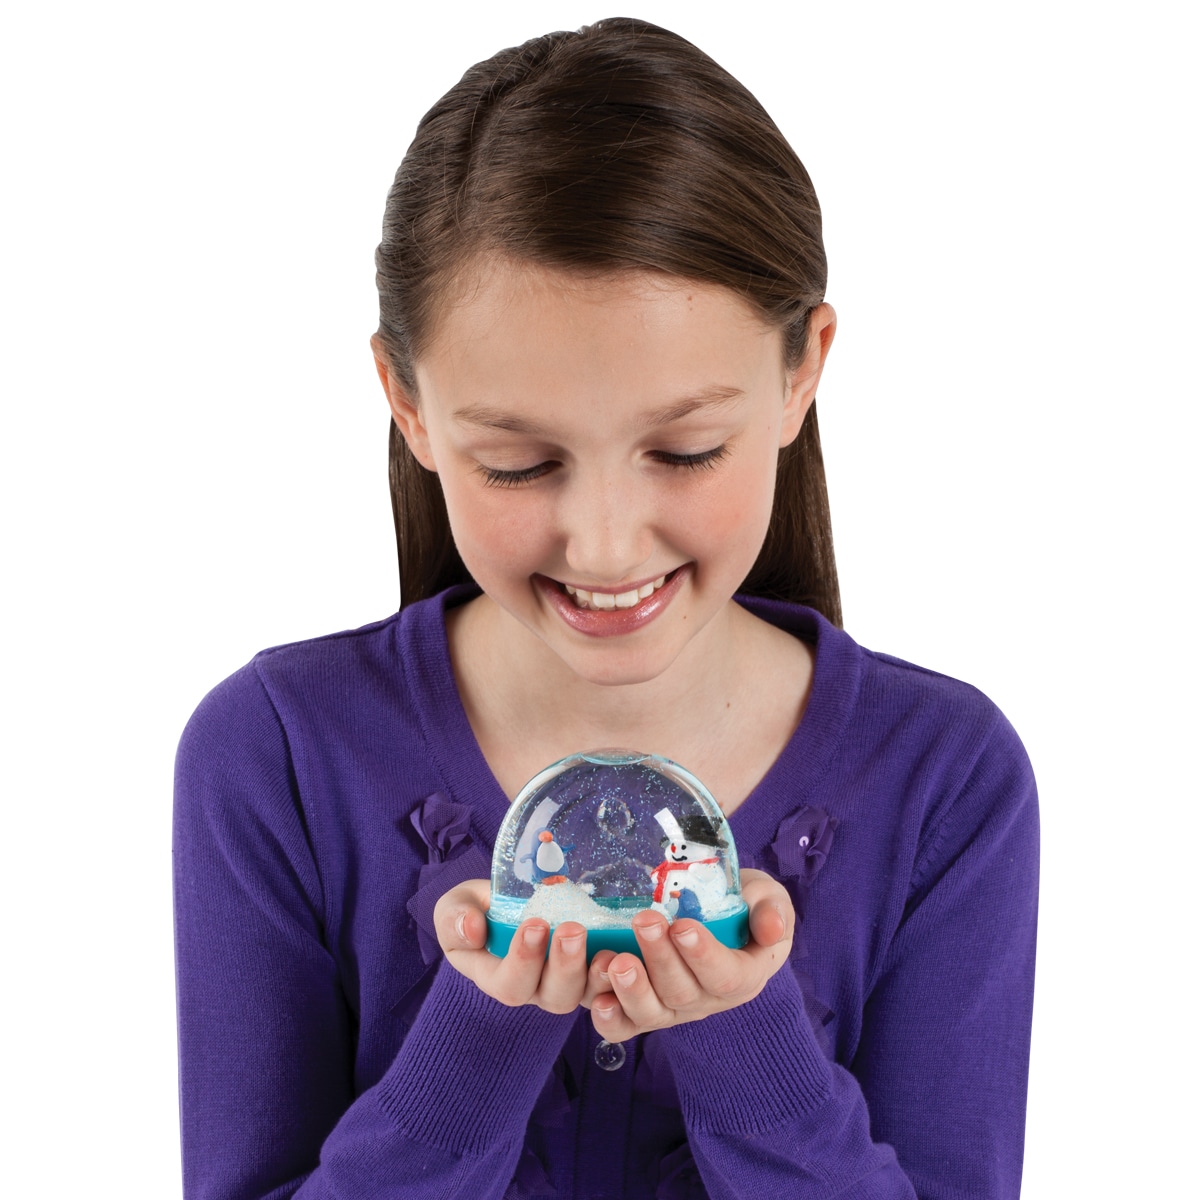 Faber-Castell Creativity For Kids Make Your Own Holiday Snow Globes in the  Craft Supplies department at